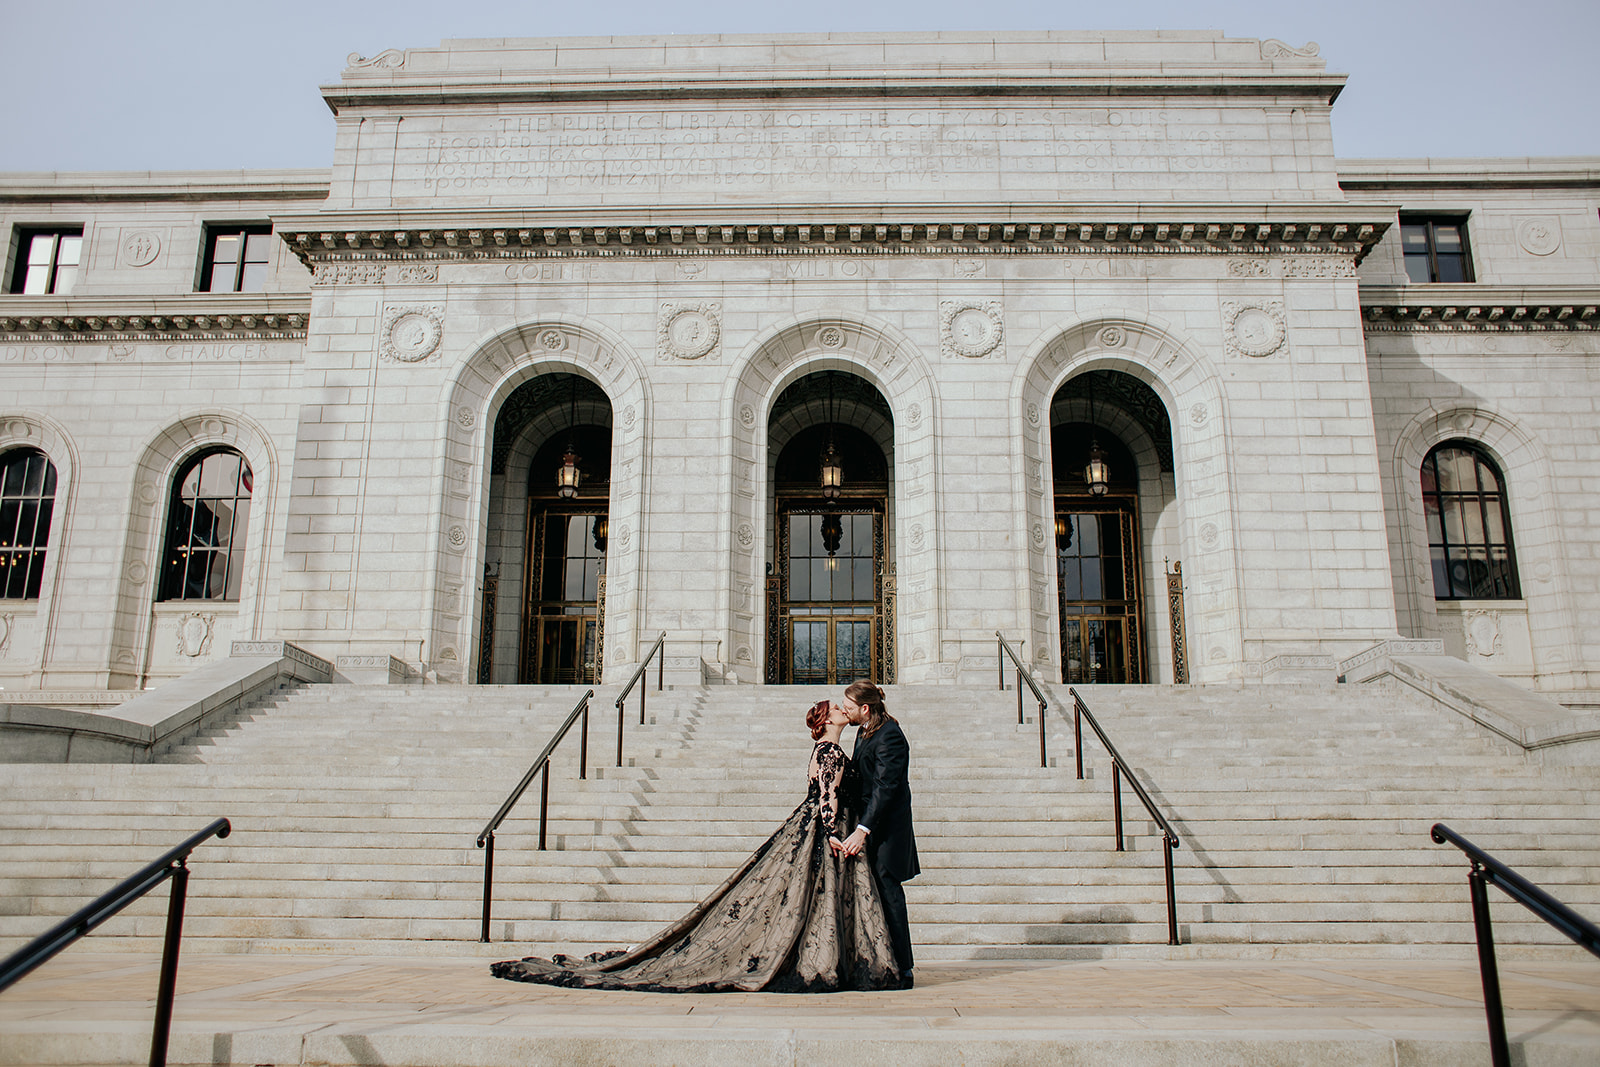 A couple who married in St. Louis kiss in front of the downtown library